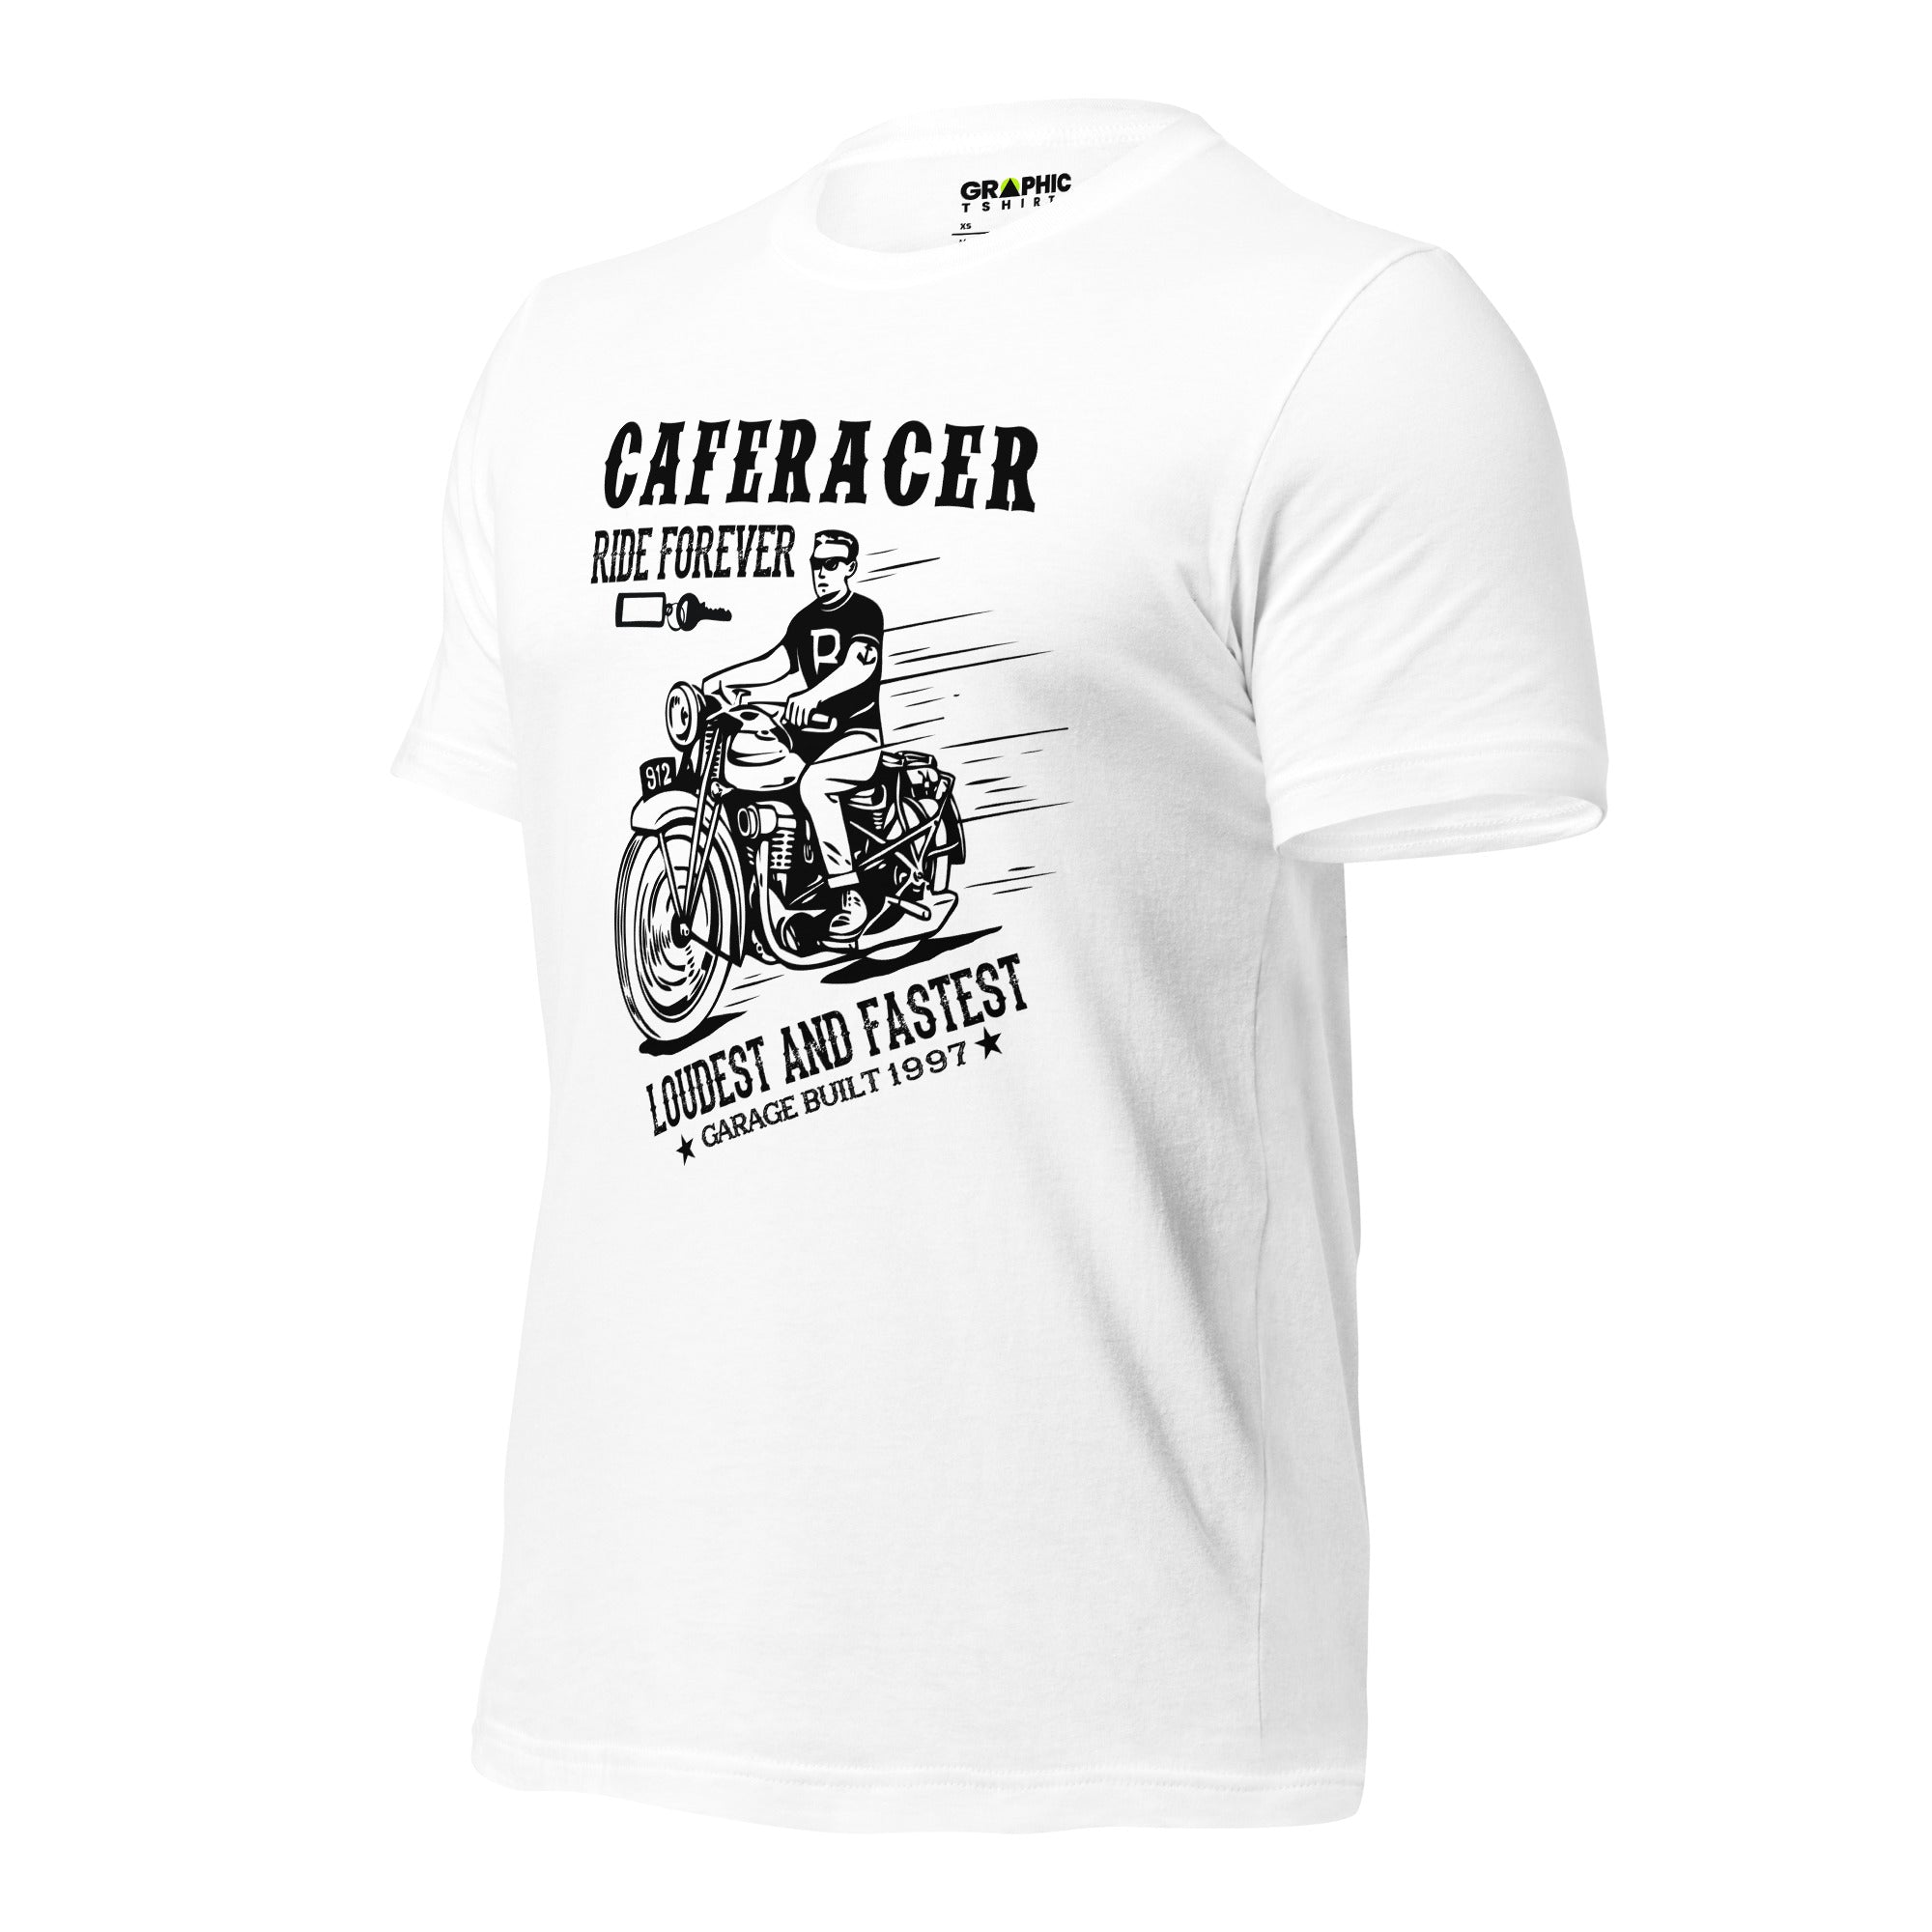 Unisex Staple T-Shirt - Cafe Racer Ride Forever Loudest And Fastest Garage Built 1997 - GRAPHIC T-SHIRTS